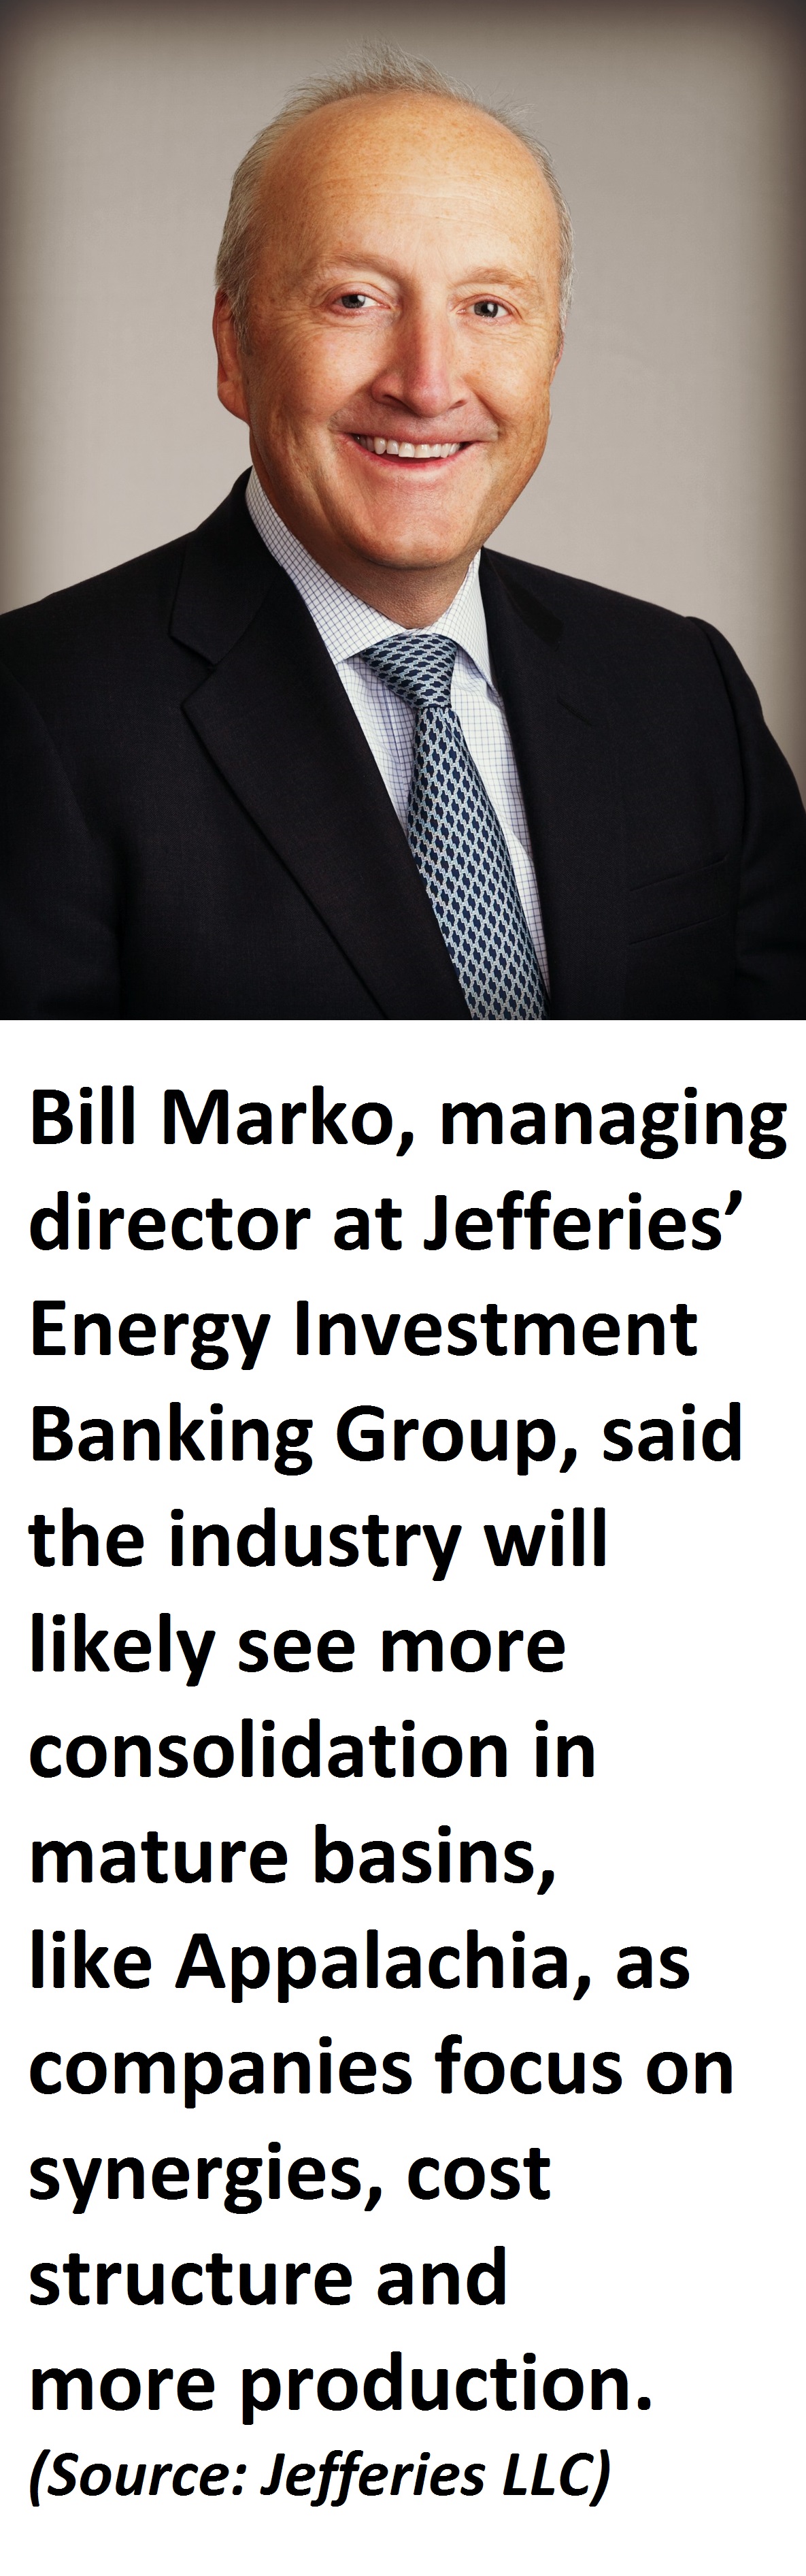 Bill Marko, managing director at Jefferies’ Energy Investment Banking Group.